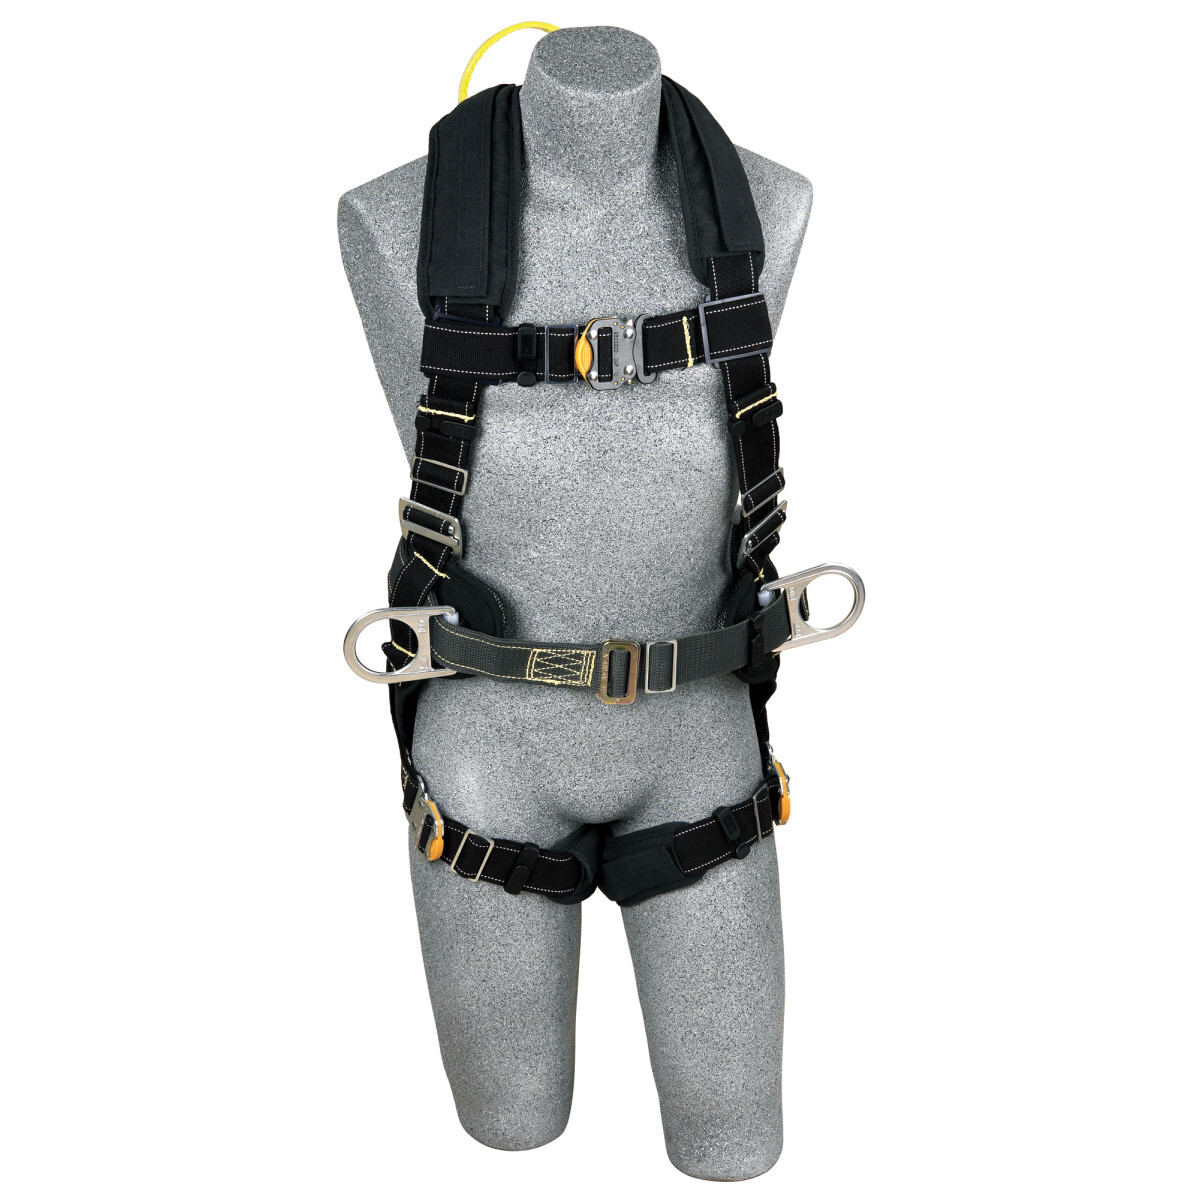 3M™ DBI-SALA® Medium ExoFit™ XP Arc Flash Construction/Full Body/Vest Style Harness With Back Web Loop, Side D-Ring, Belt With P